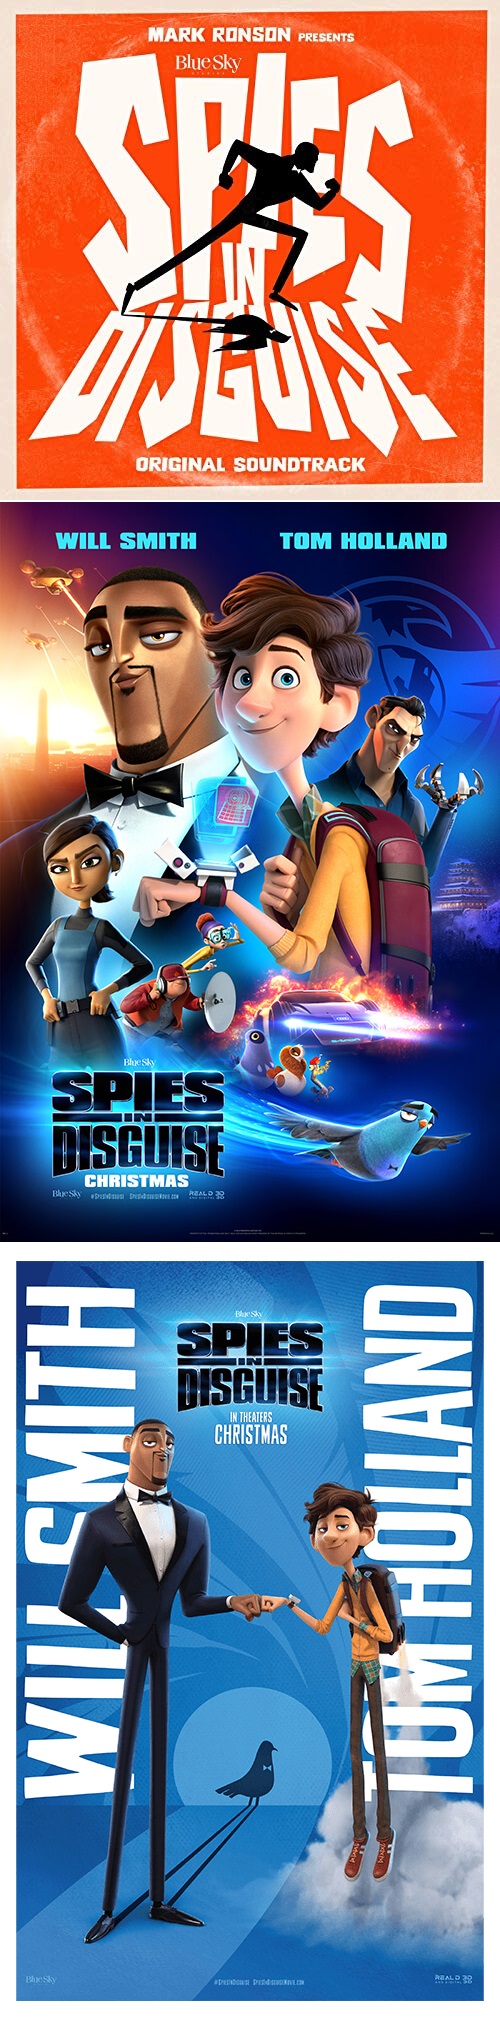 Les Incognitos (Spies in Disguise)